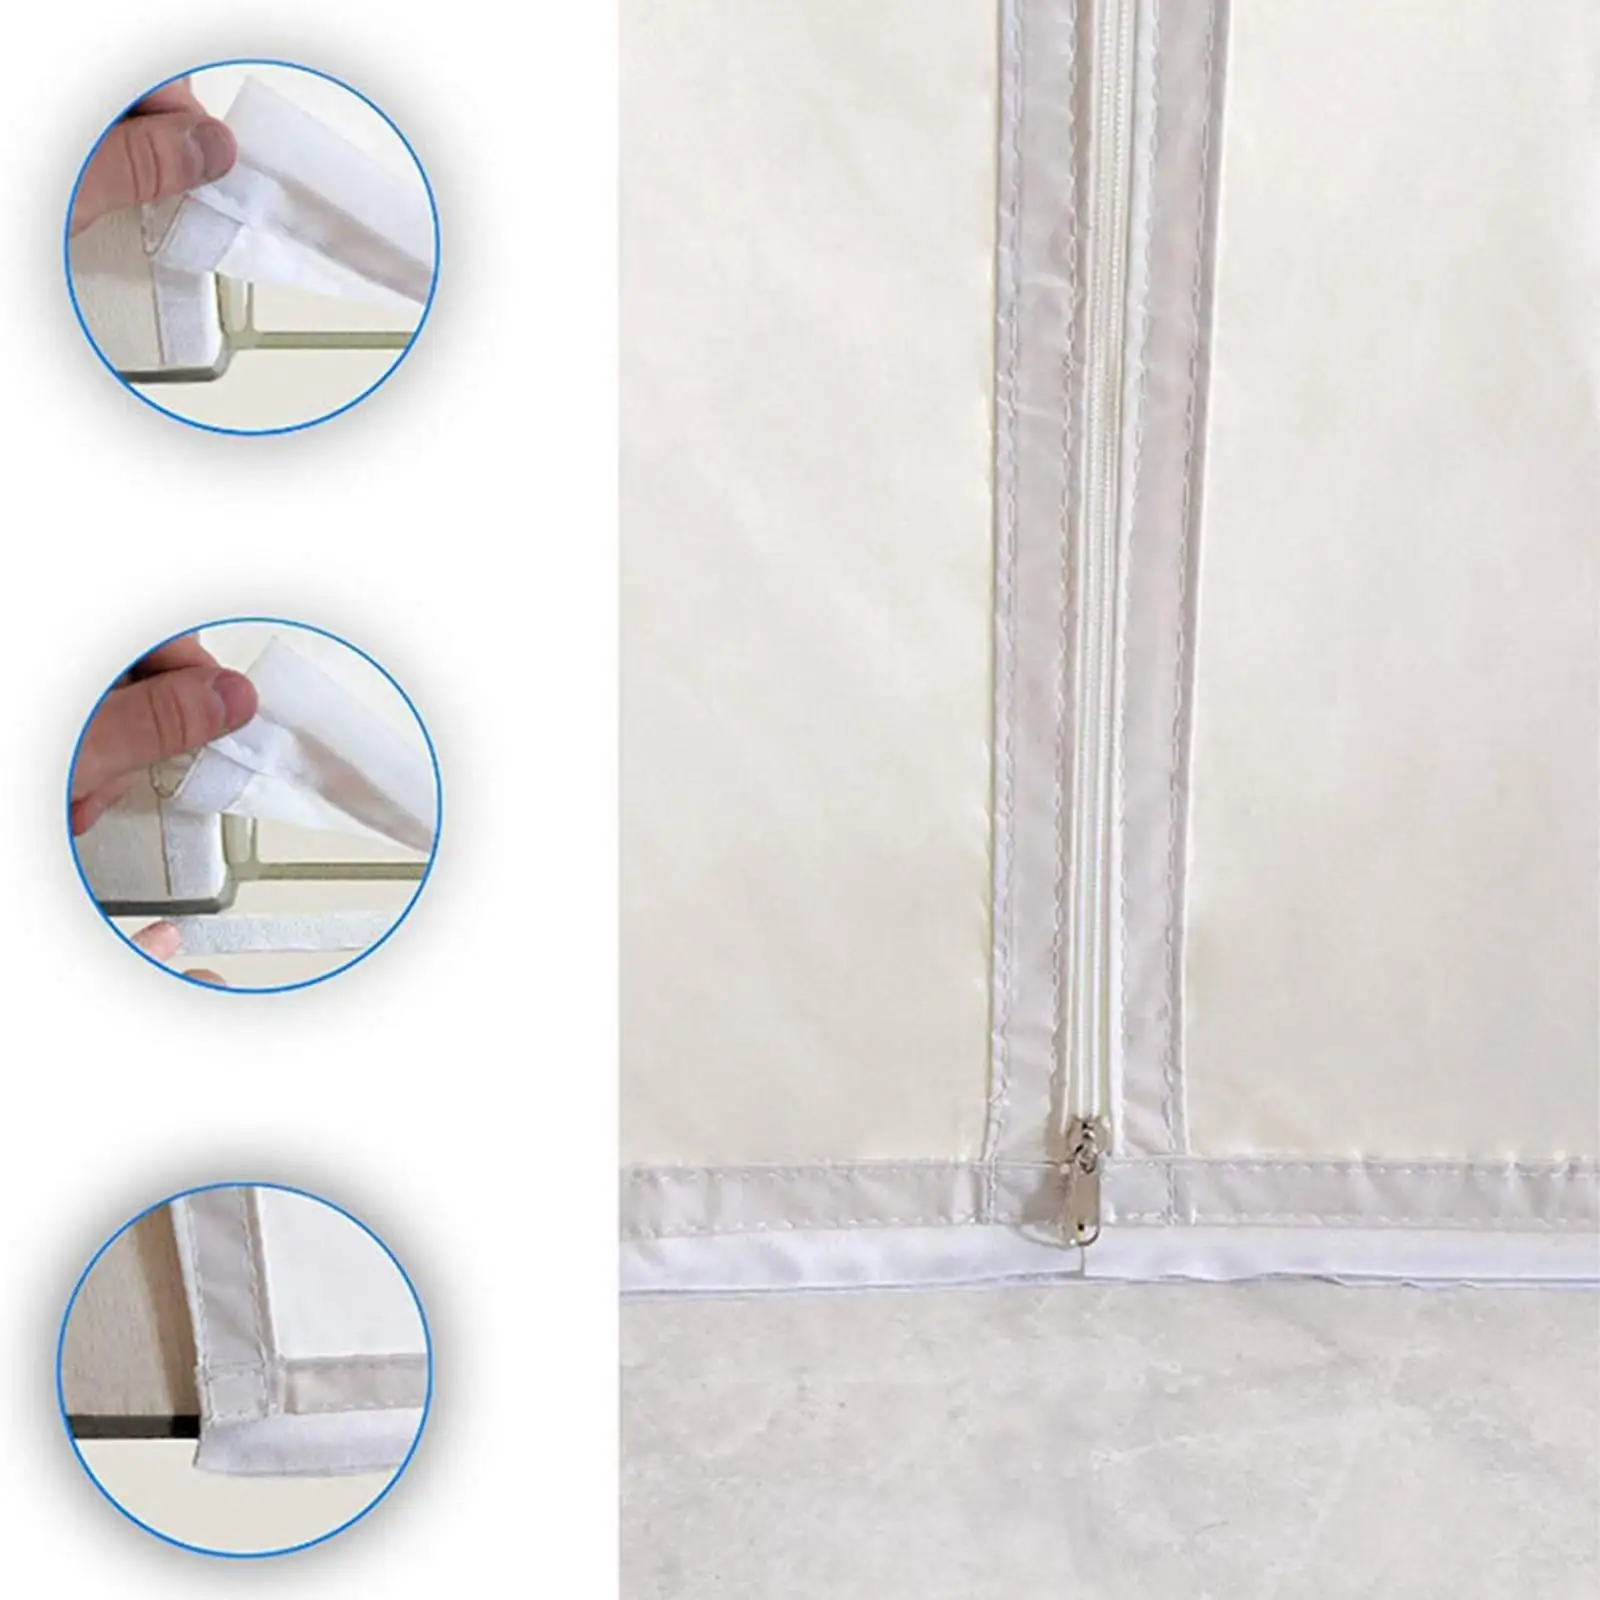 Screen Door Seal for Portable Air Conditioner Air Conditioning Door Cover Seal Window Seal Easy to Install for Bedroom